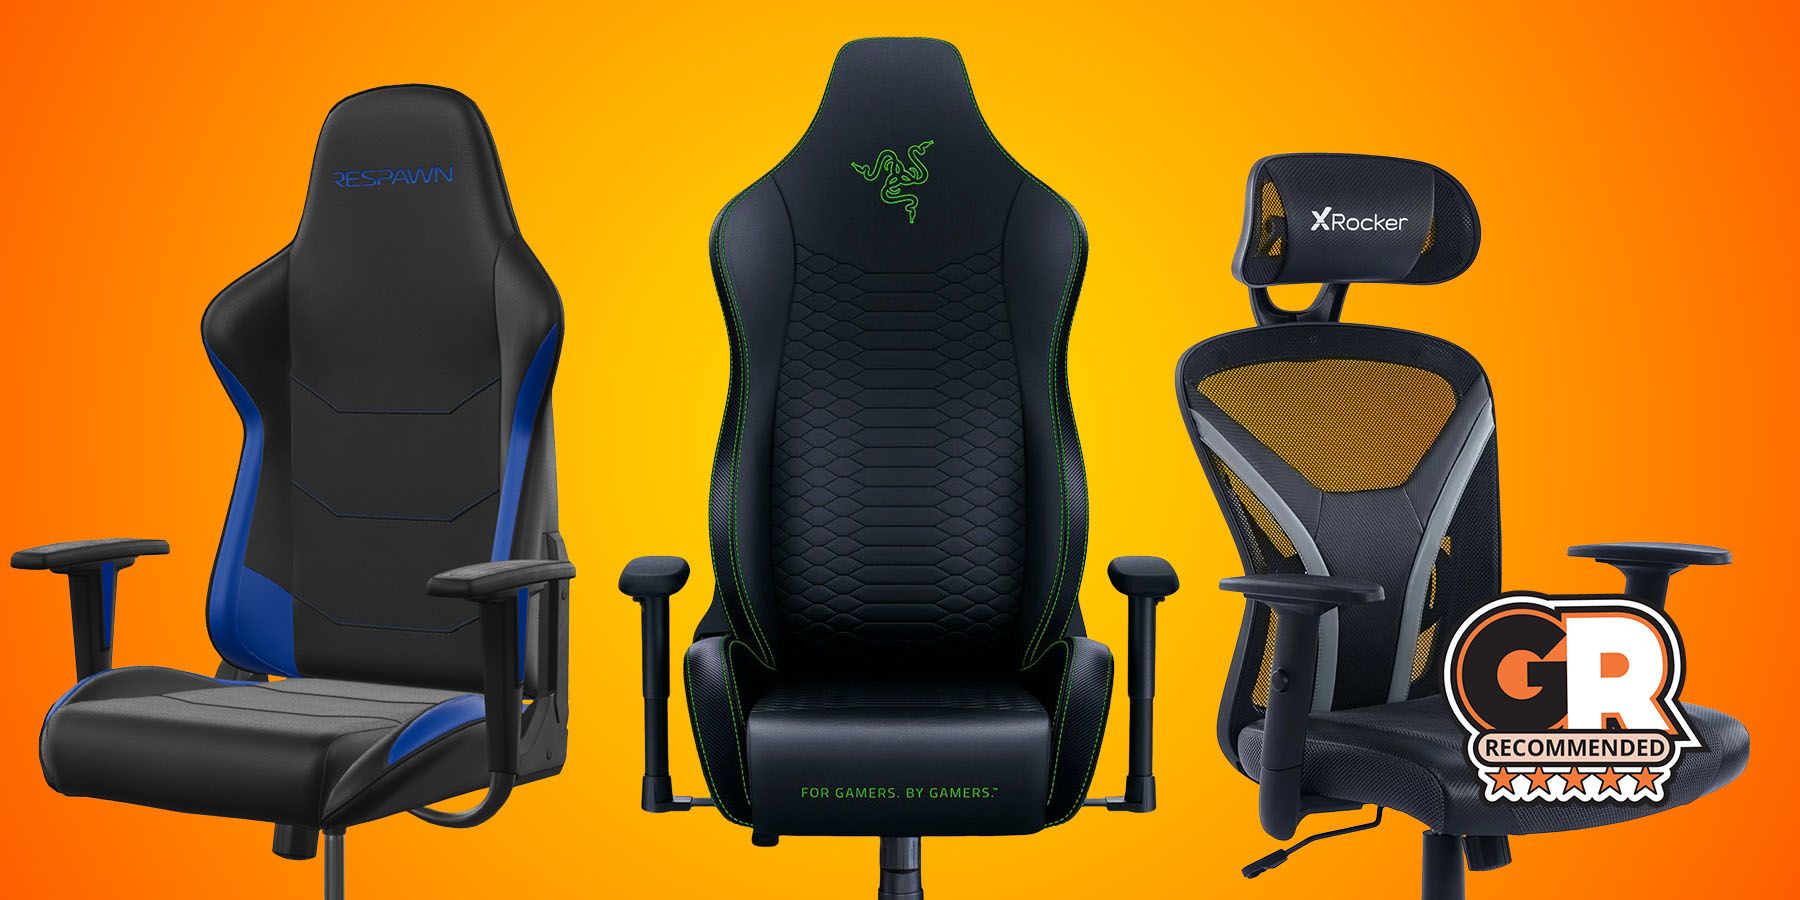 How To Turn A Bad Gaming Chair Into A Good One For $90 